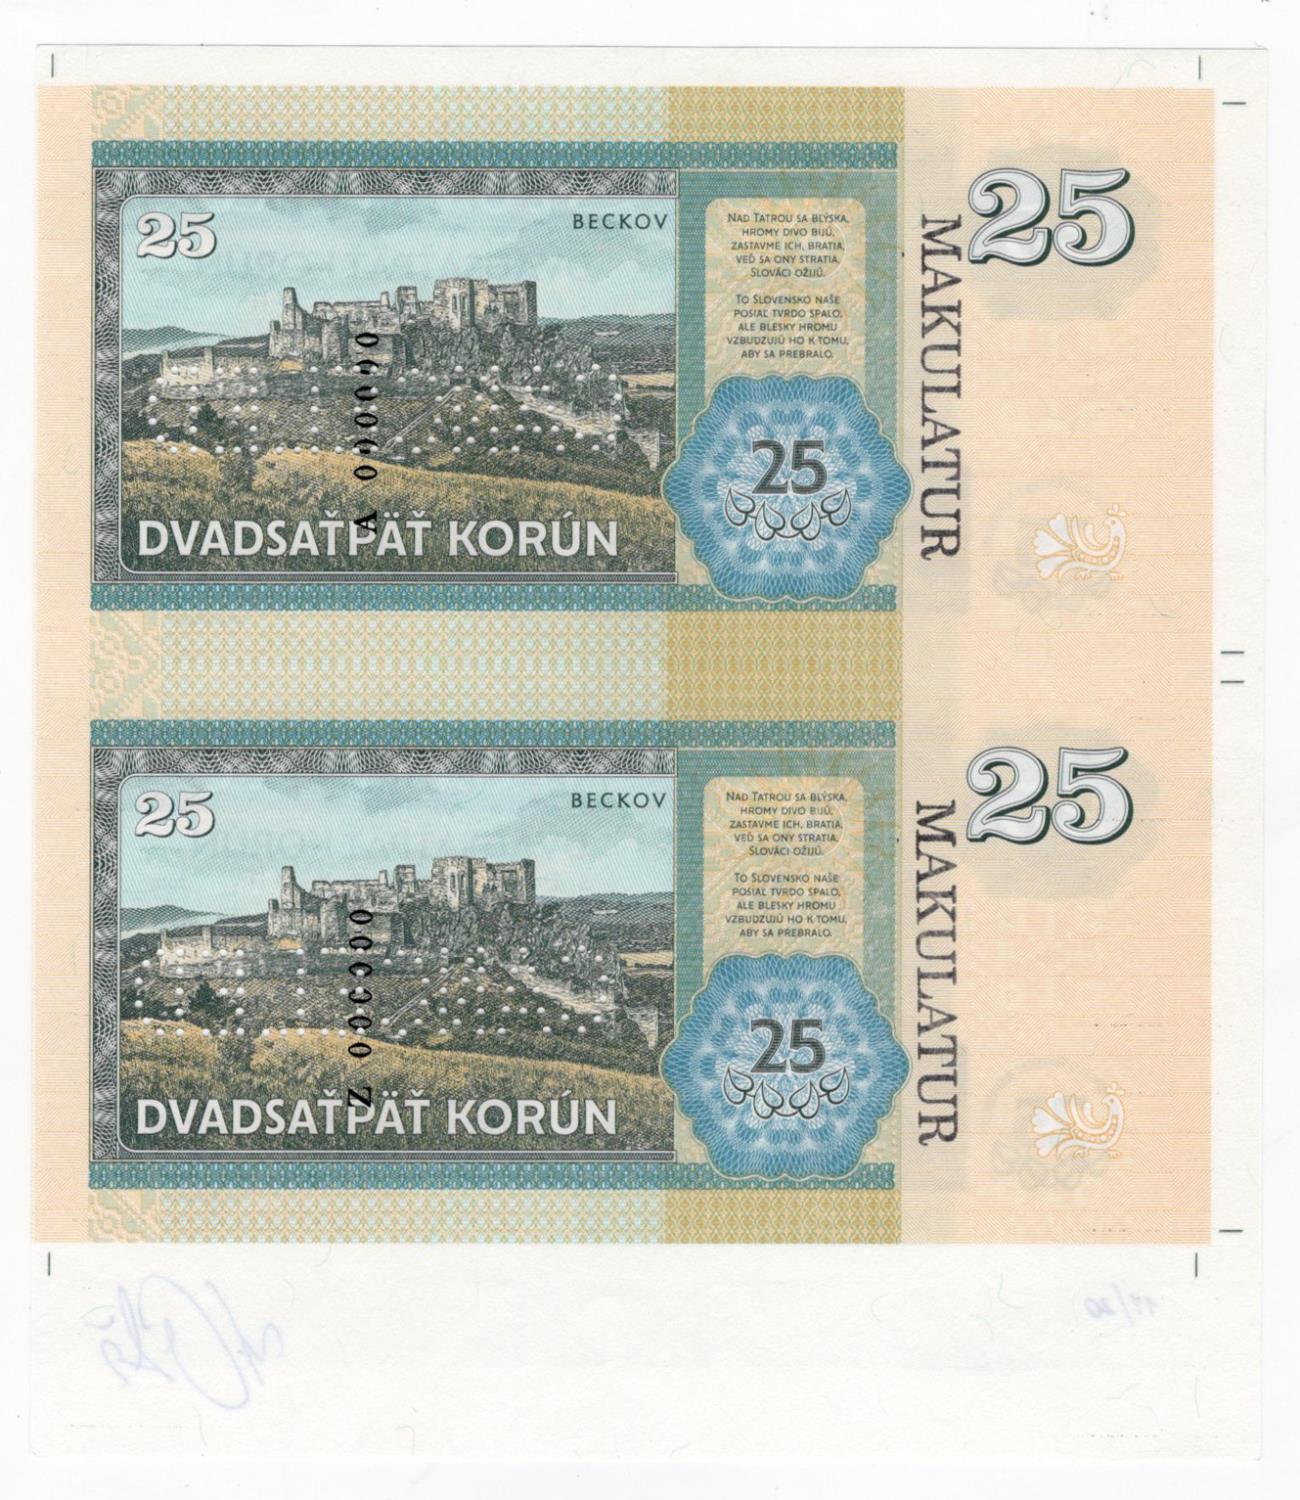 Test Note, 25 Korun Slovakia (not legal tender), private essay security printing specimen test - Image 2 of 2